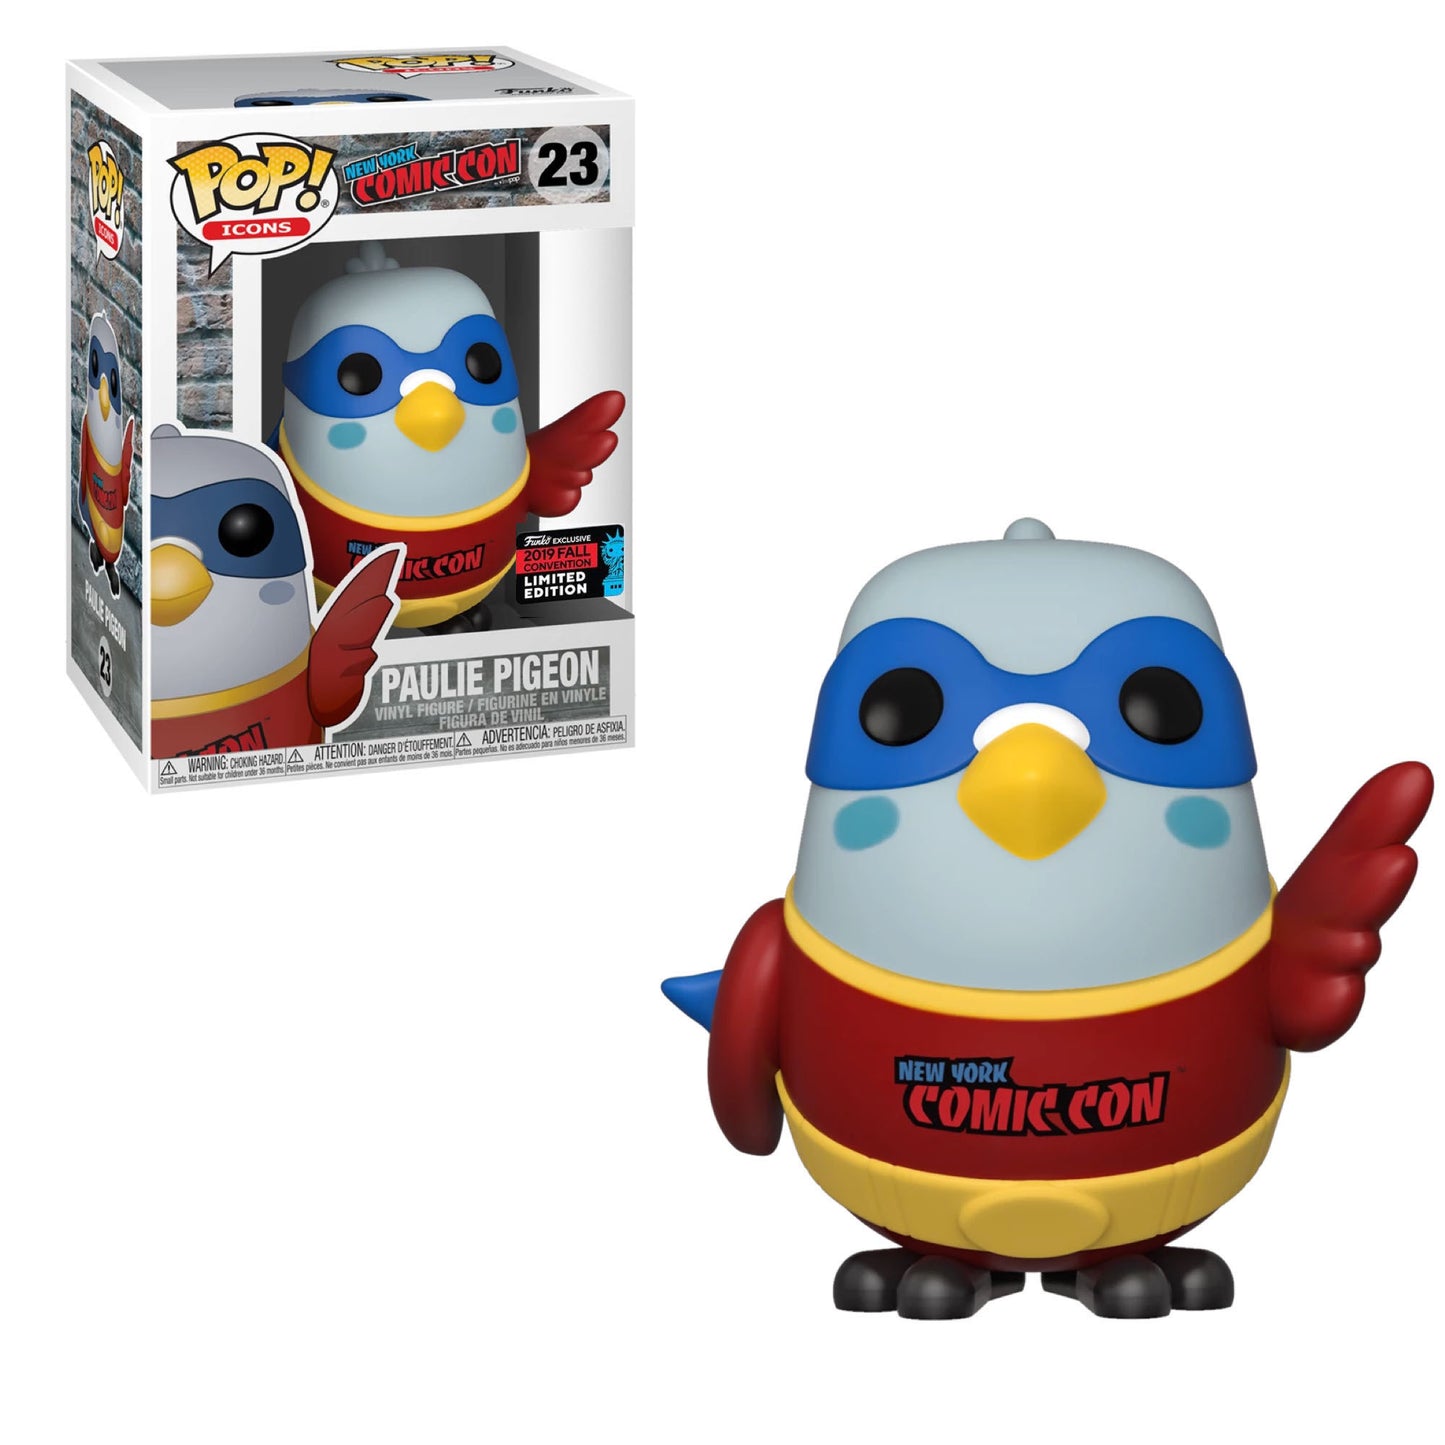 Ad Icons - Paulie Pigeon (Red/Yellow Shirt) #23 - 2019 Exclusive Funko Pop! Vinyl Figure